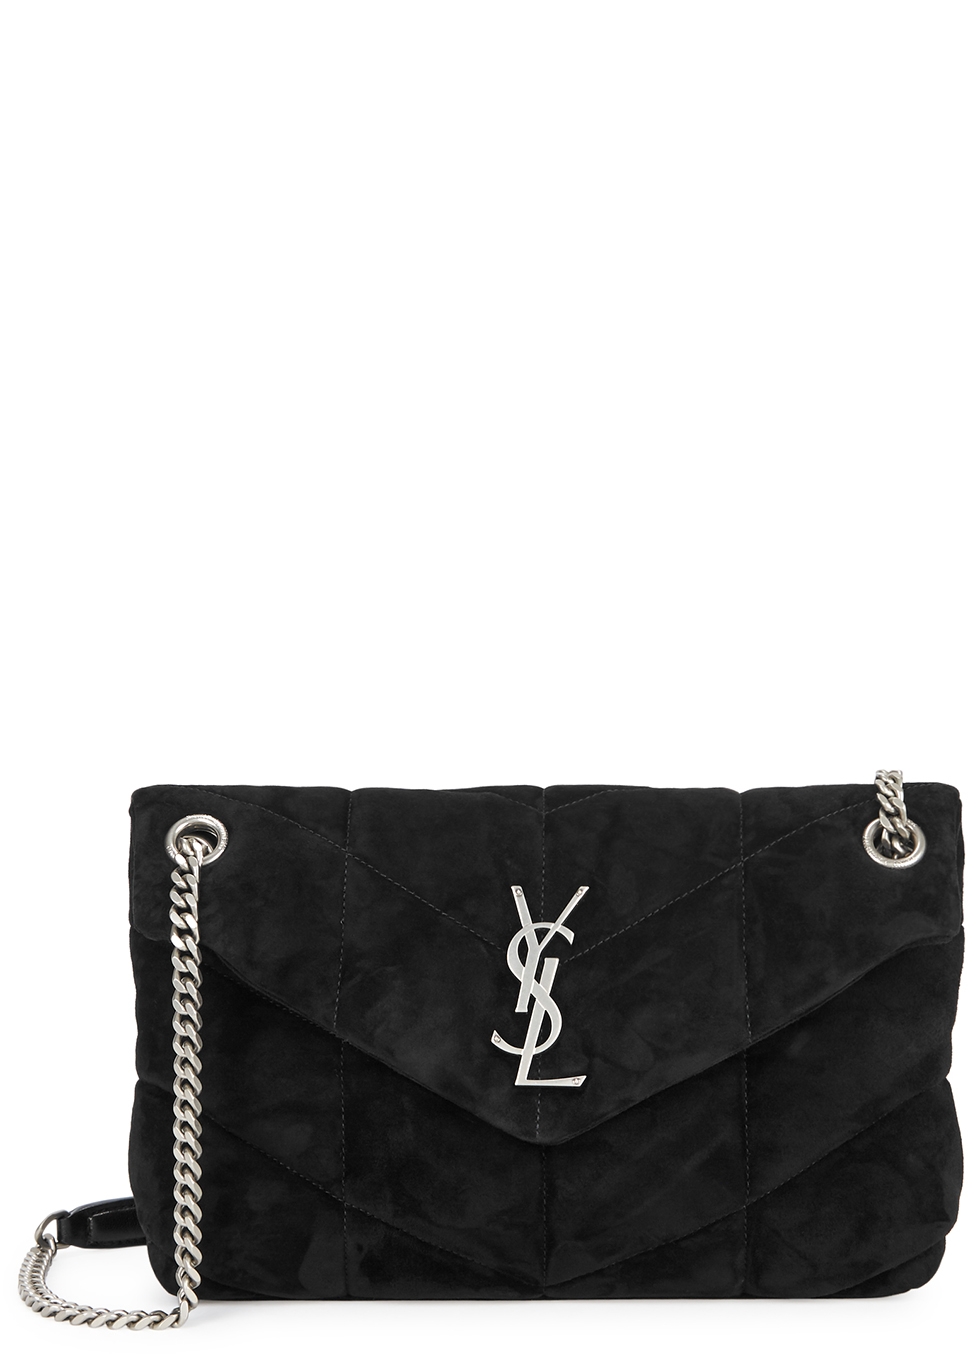 Loulou Puffer small black suede shoulder bag